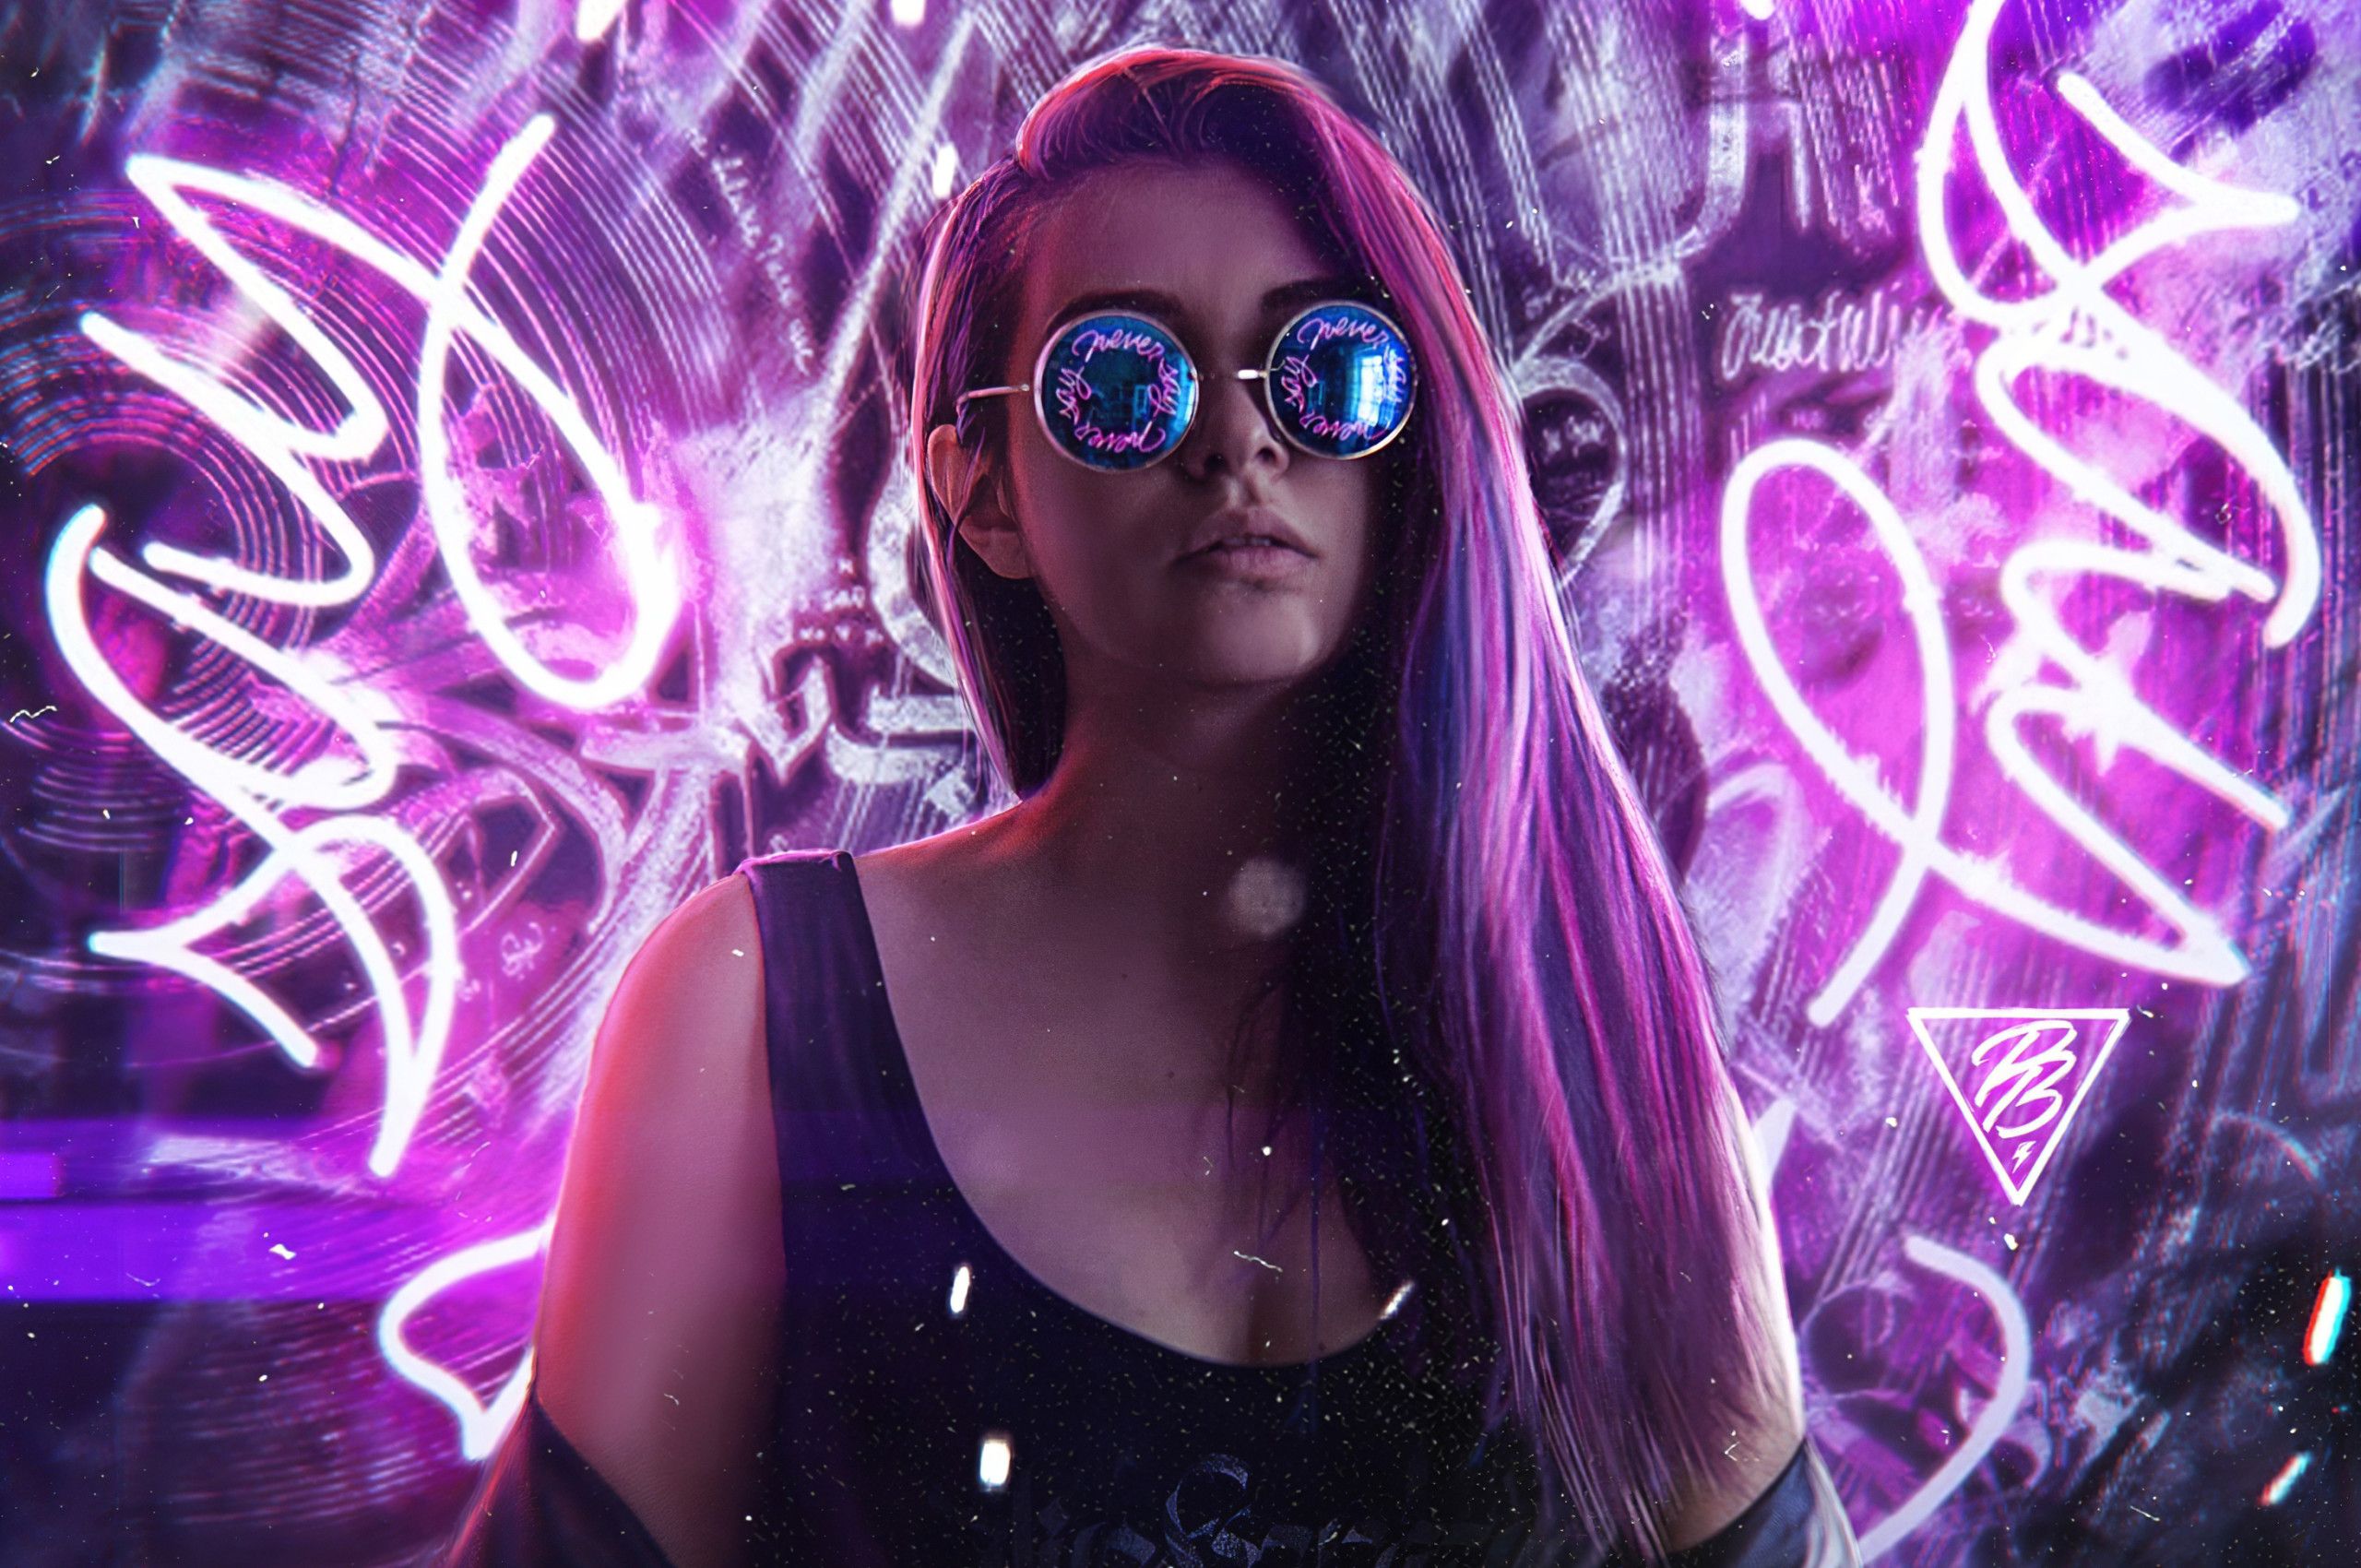 Neon Girl Stock Photos and Images - 123RF